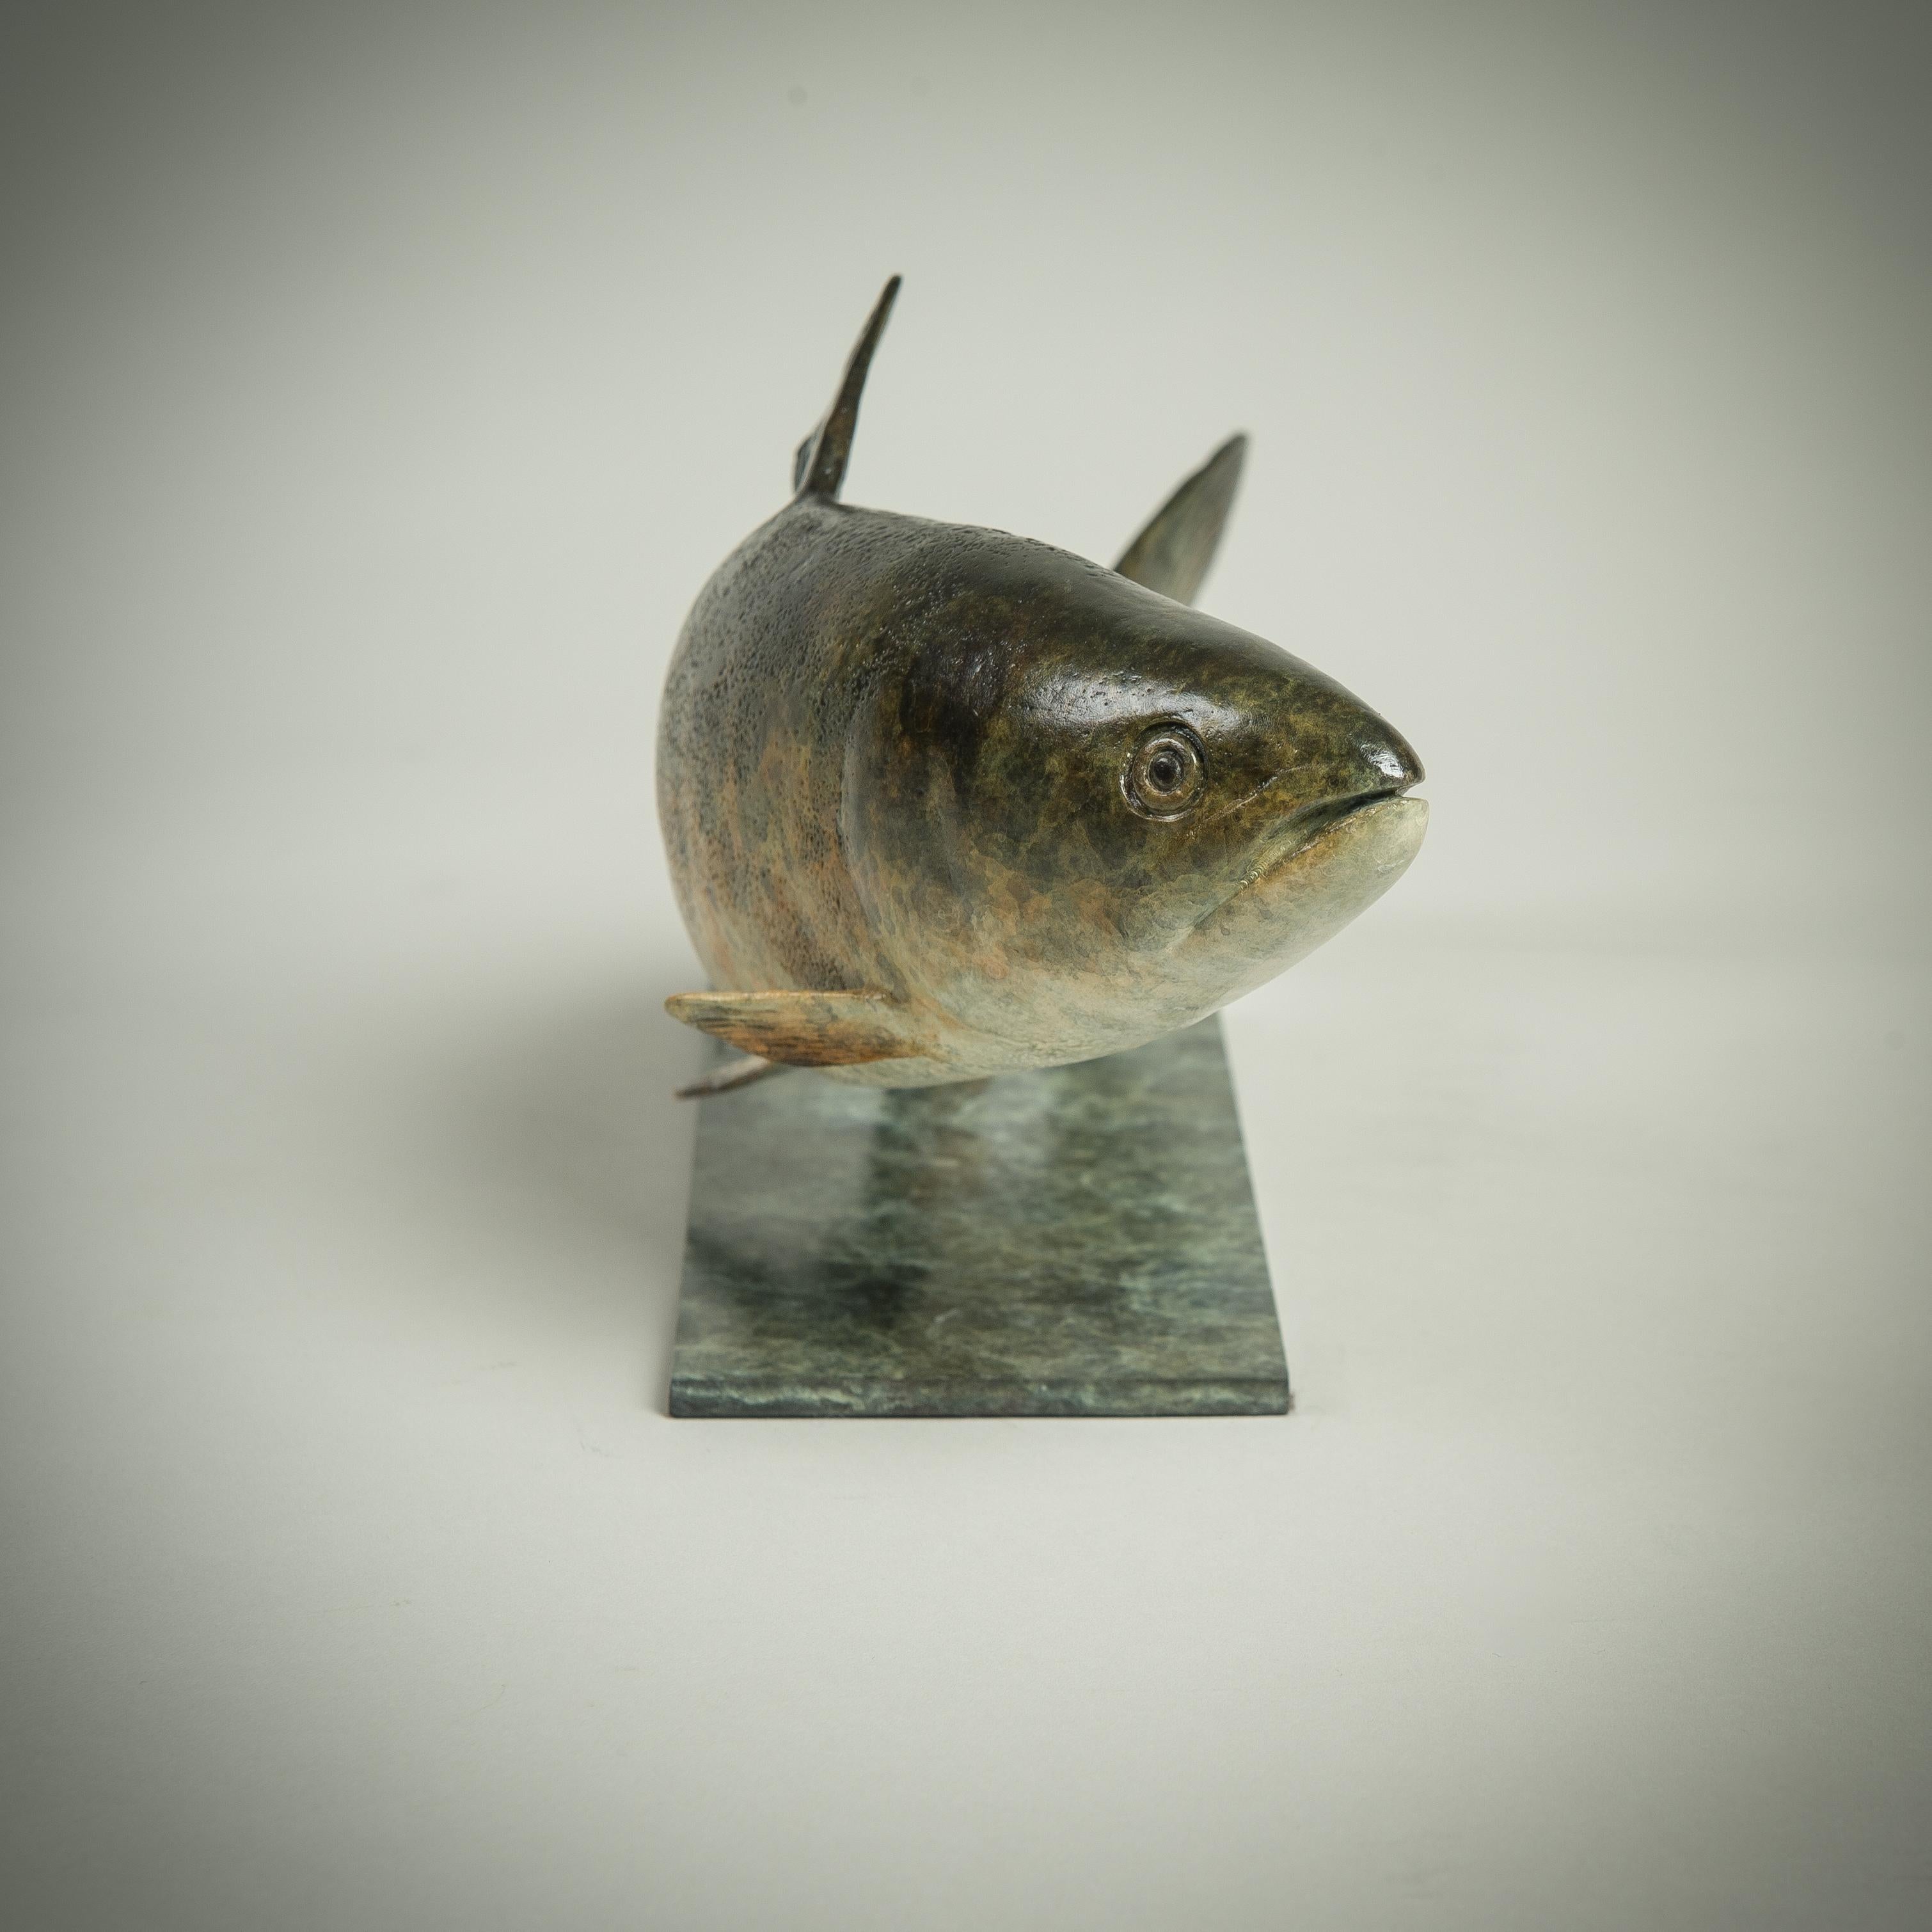 'Trout' by Richard Smith is a beautiful contemporary bronze sculpture of a small trout swimming in the water. Beautiful patina and incredible detail. Sure to make an amazing addition to any collection!

Richard J. Smith was born in Luton,